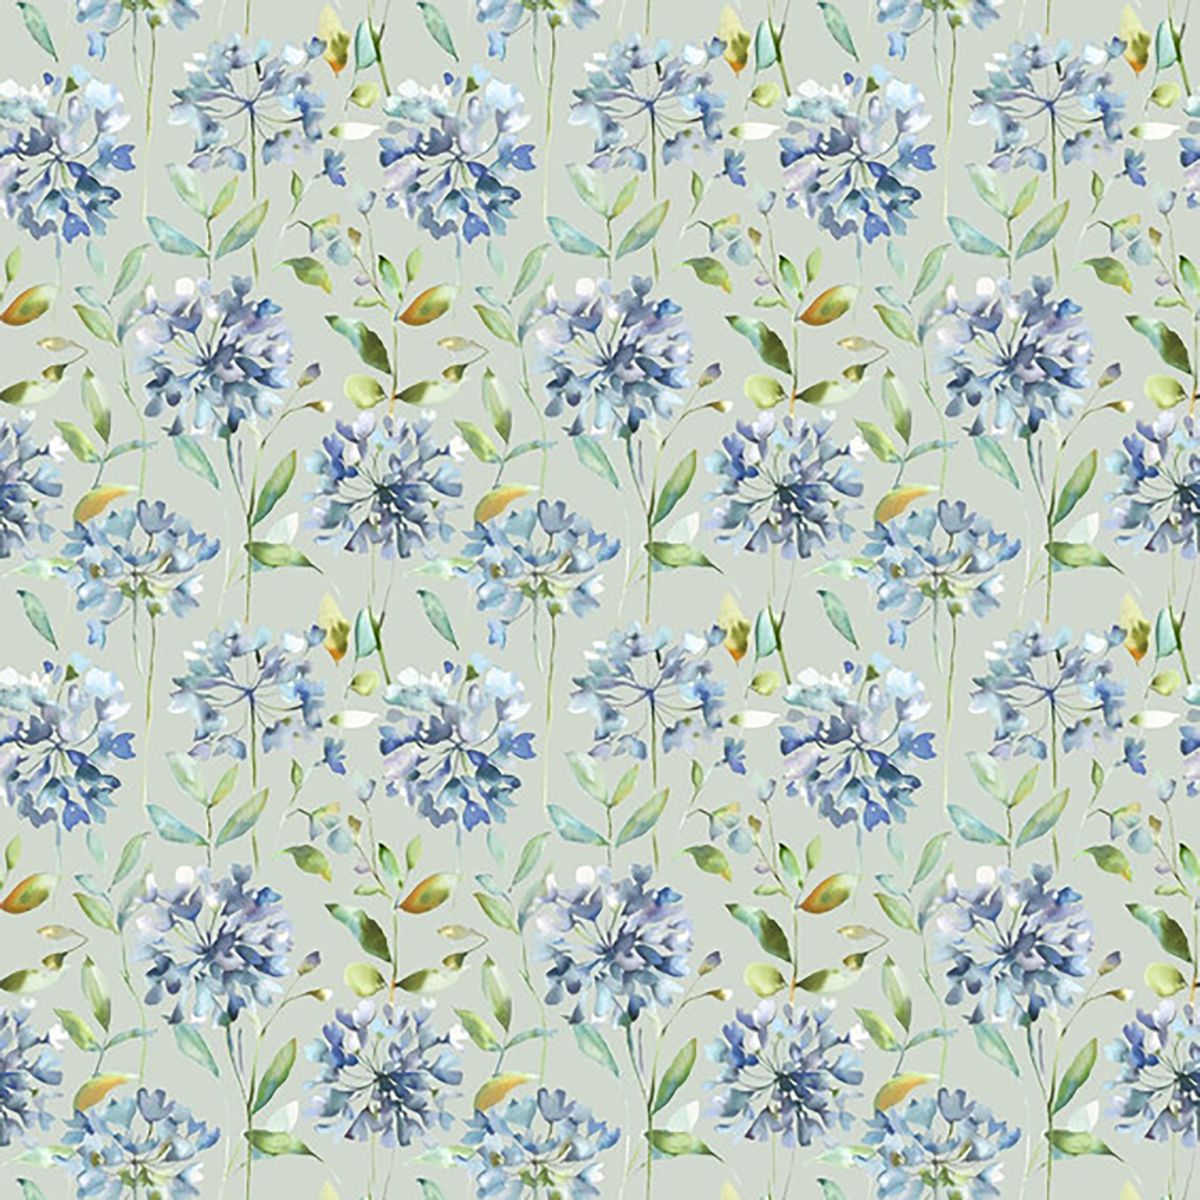 Clovelly Bluebell Fabric by Voyage Maison